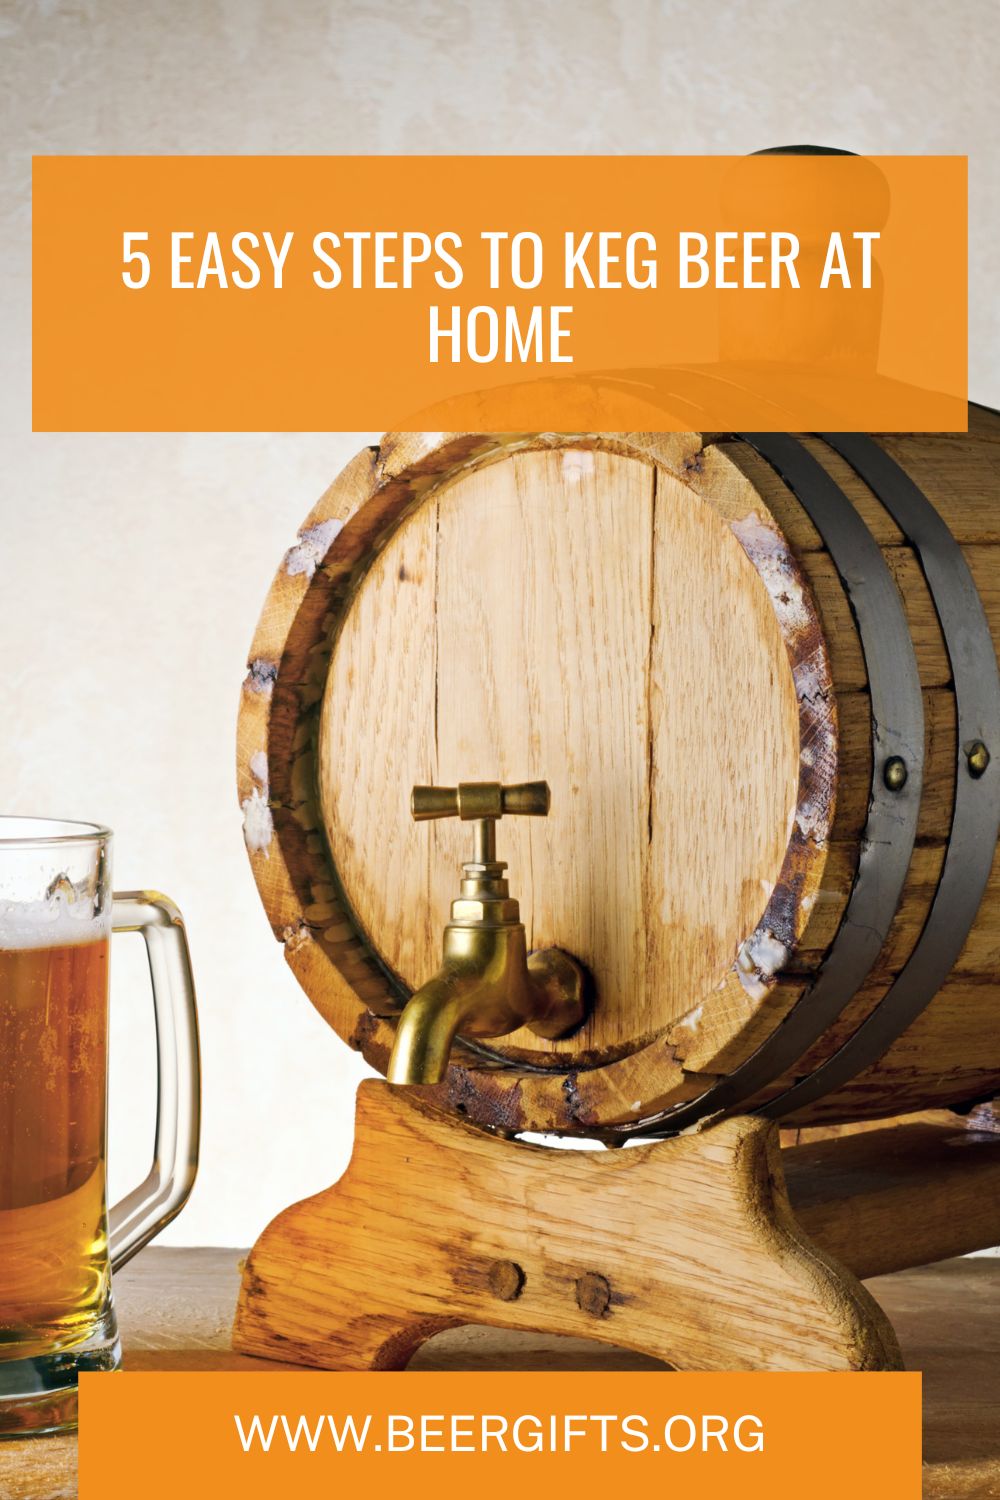 5 Easy Steps to Keg Beer at Home1